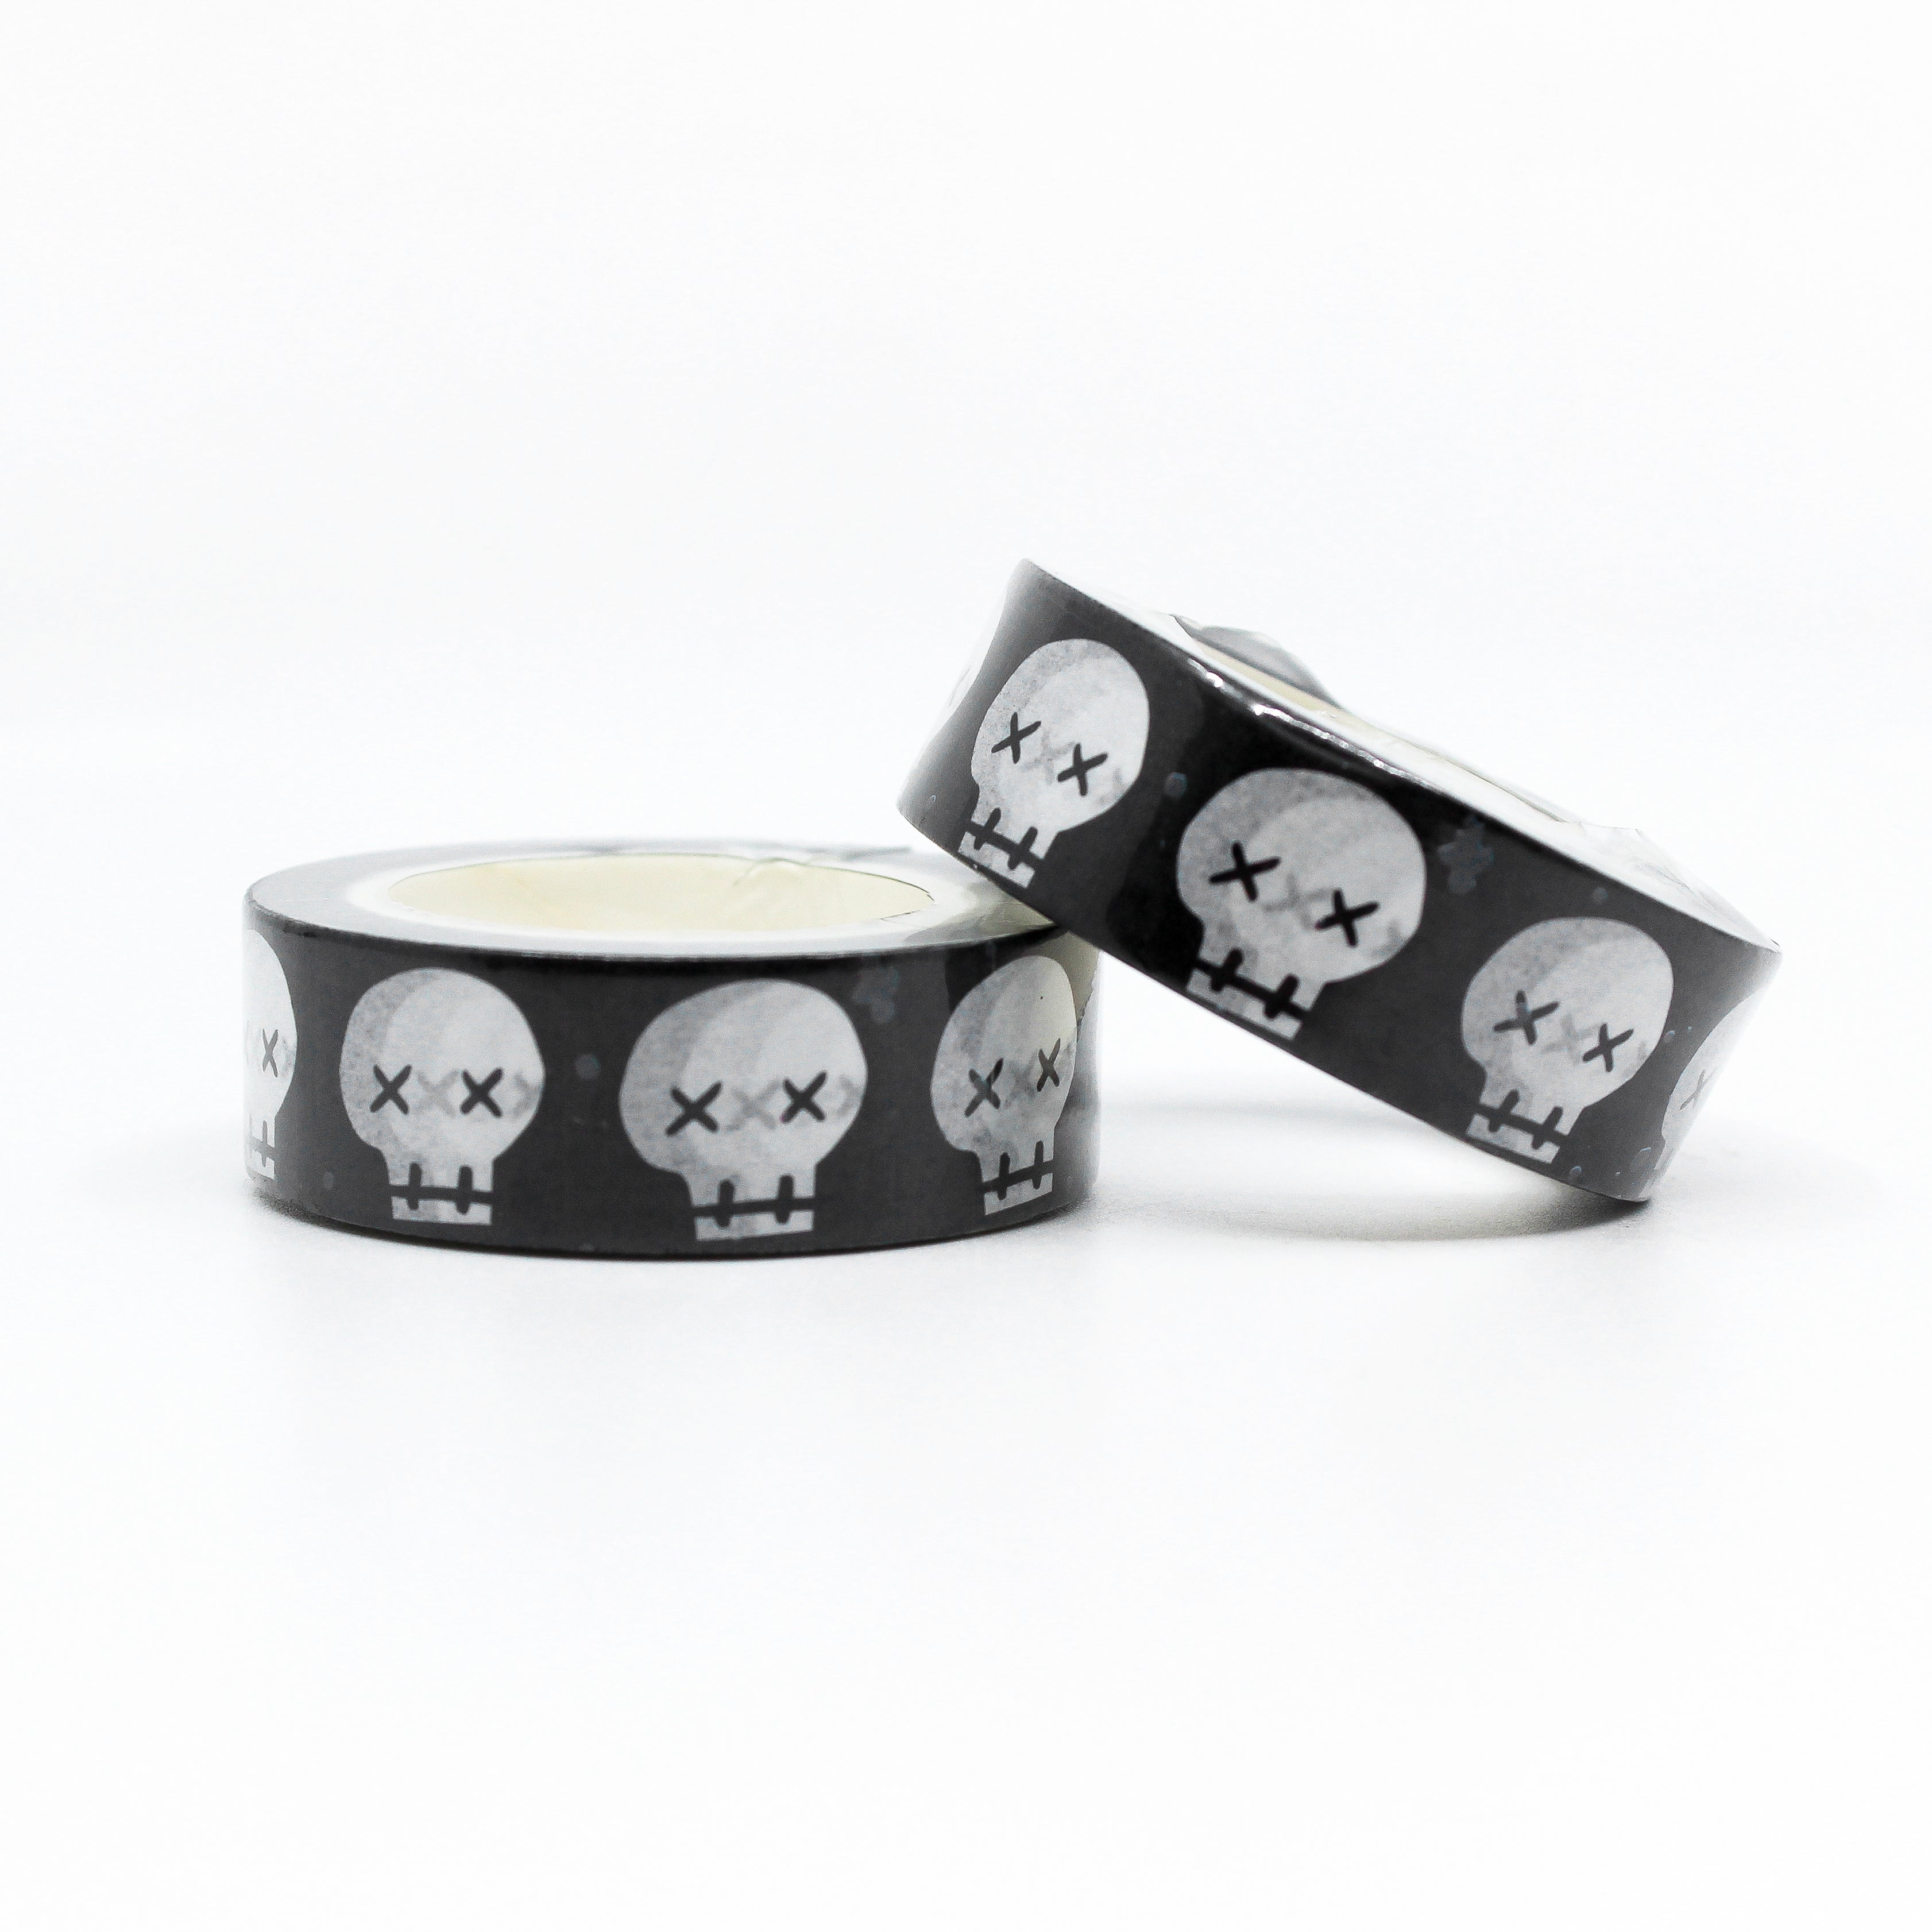 This is a roll of Halloween skulls with x's eyes washi tapes from BBB Supplies Craft Shop